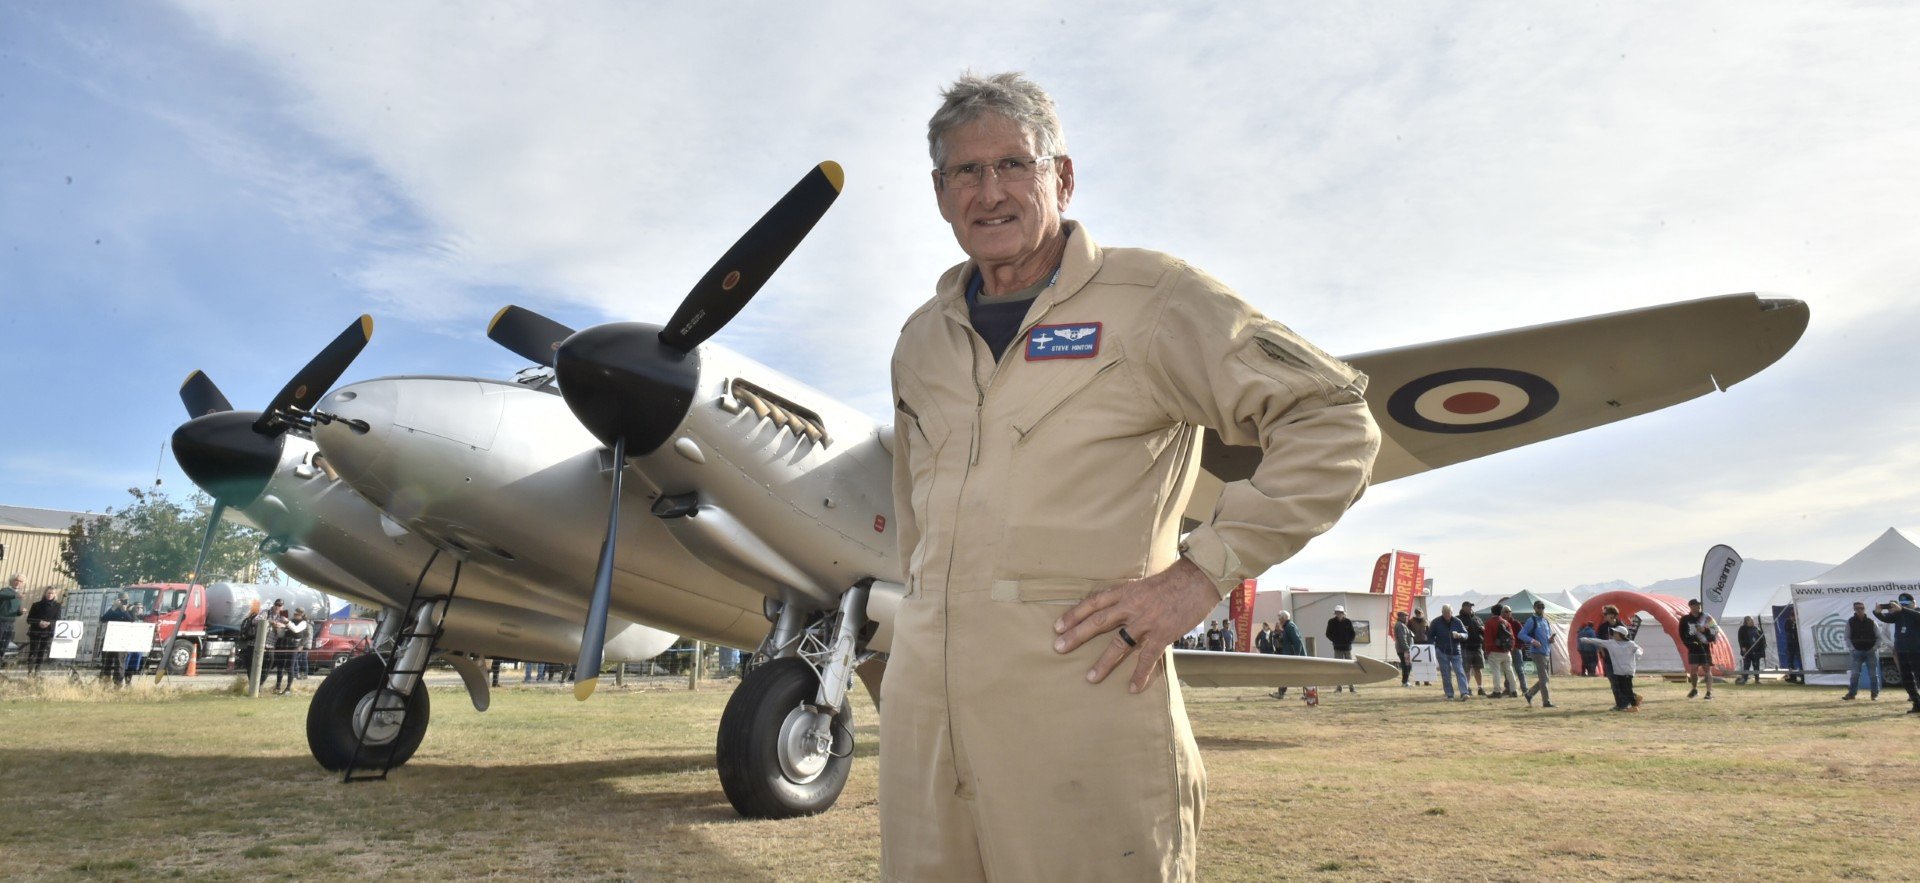 Pilot Steve Hinton, of the United States, stands in front of a newly restored Mosquito de...